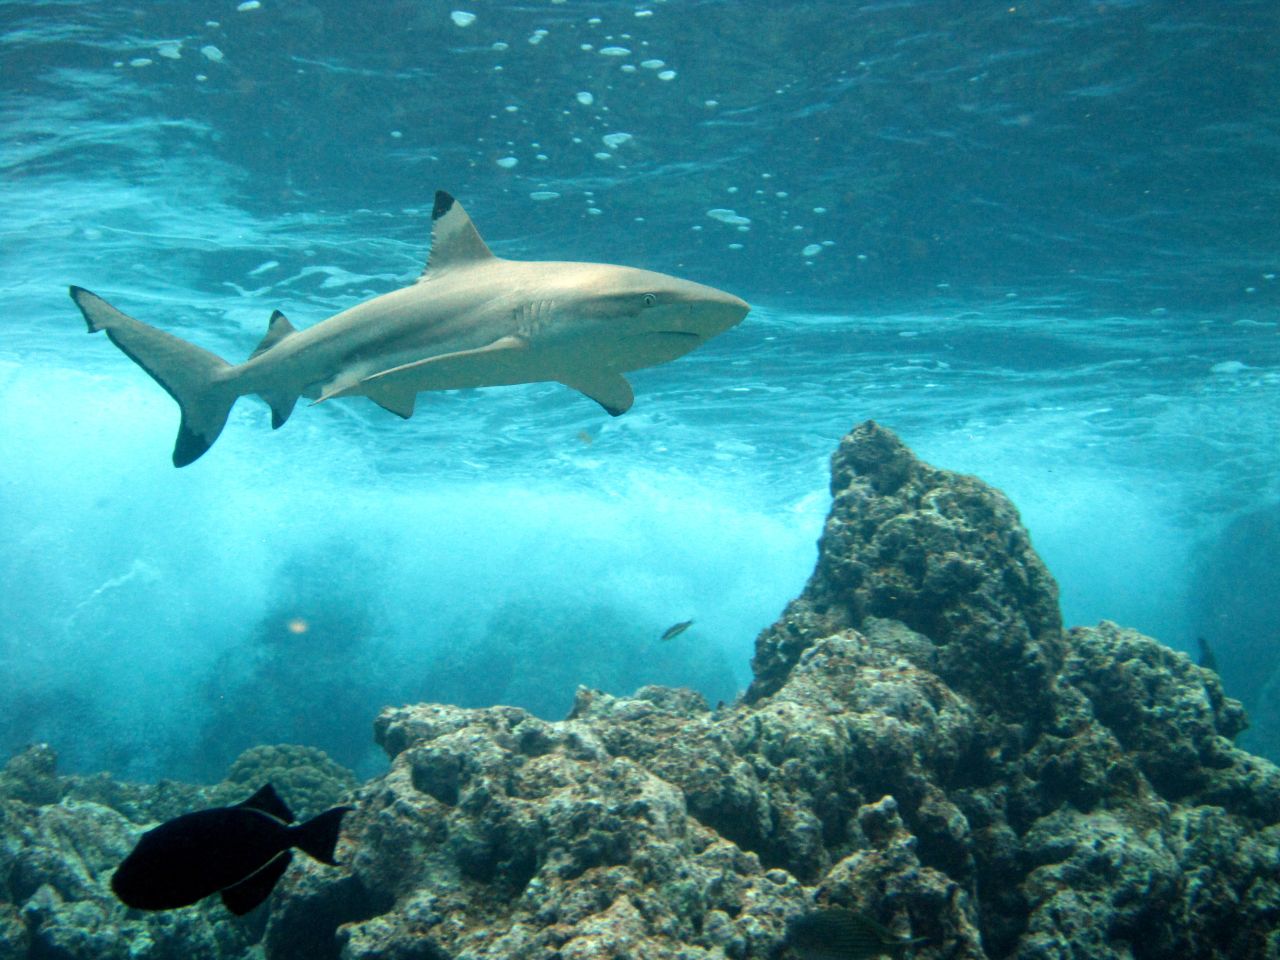 A new survey of Pacific reef sharks has shown that numbers are dwindling dramatically in areas near islands with human populations.